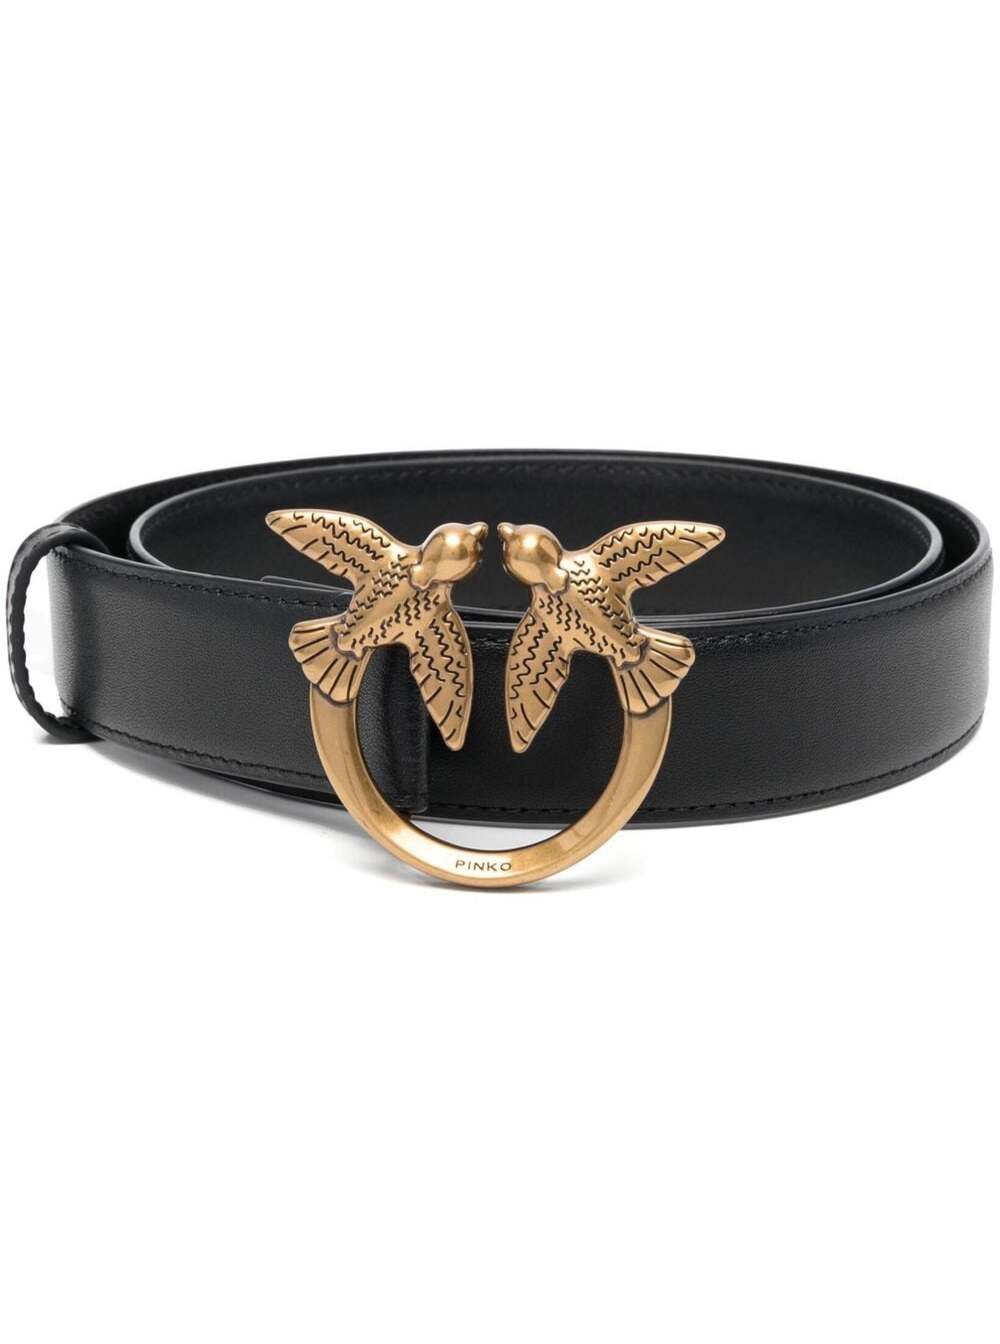 Pinko Love Birds Black Belt With Logo Buckle In Soft Silky Leather Woman